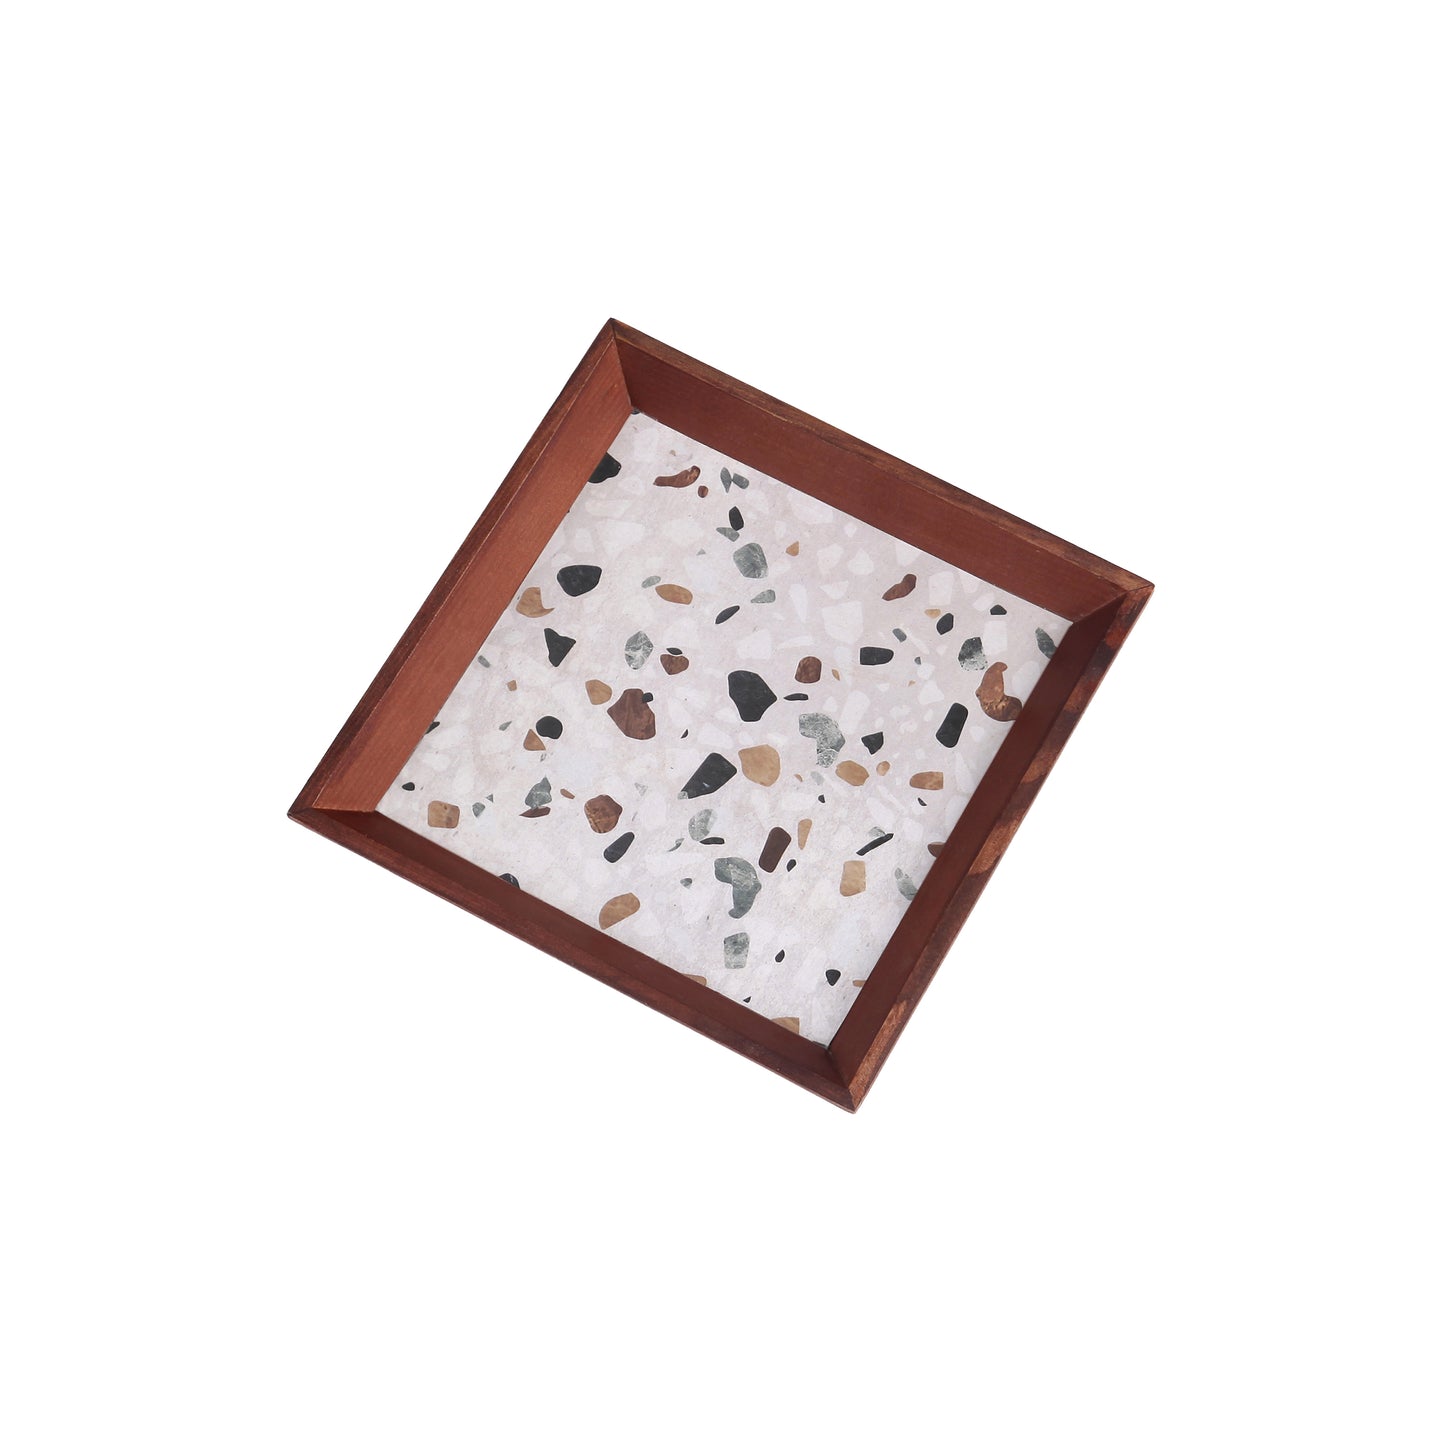 A Tiny Mistake Mosaic Small Square Wooden Serving Tray, 18 x 18 x 2 cm